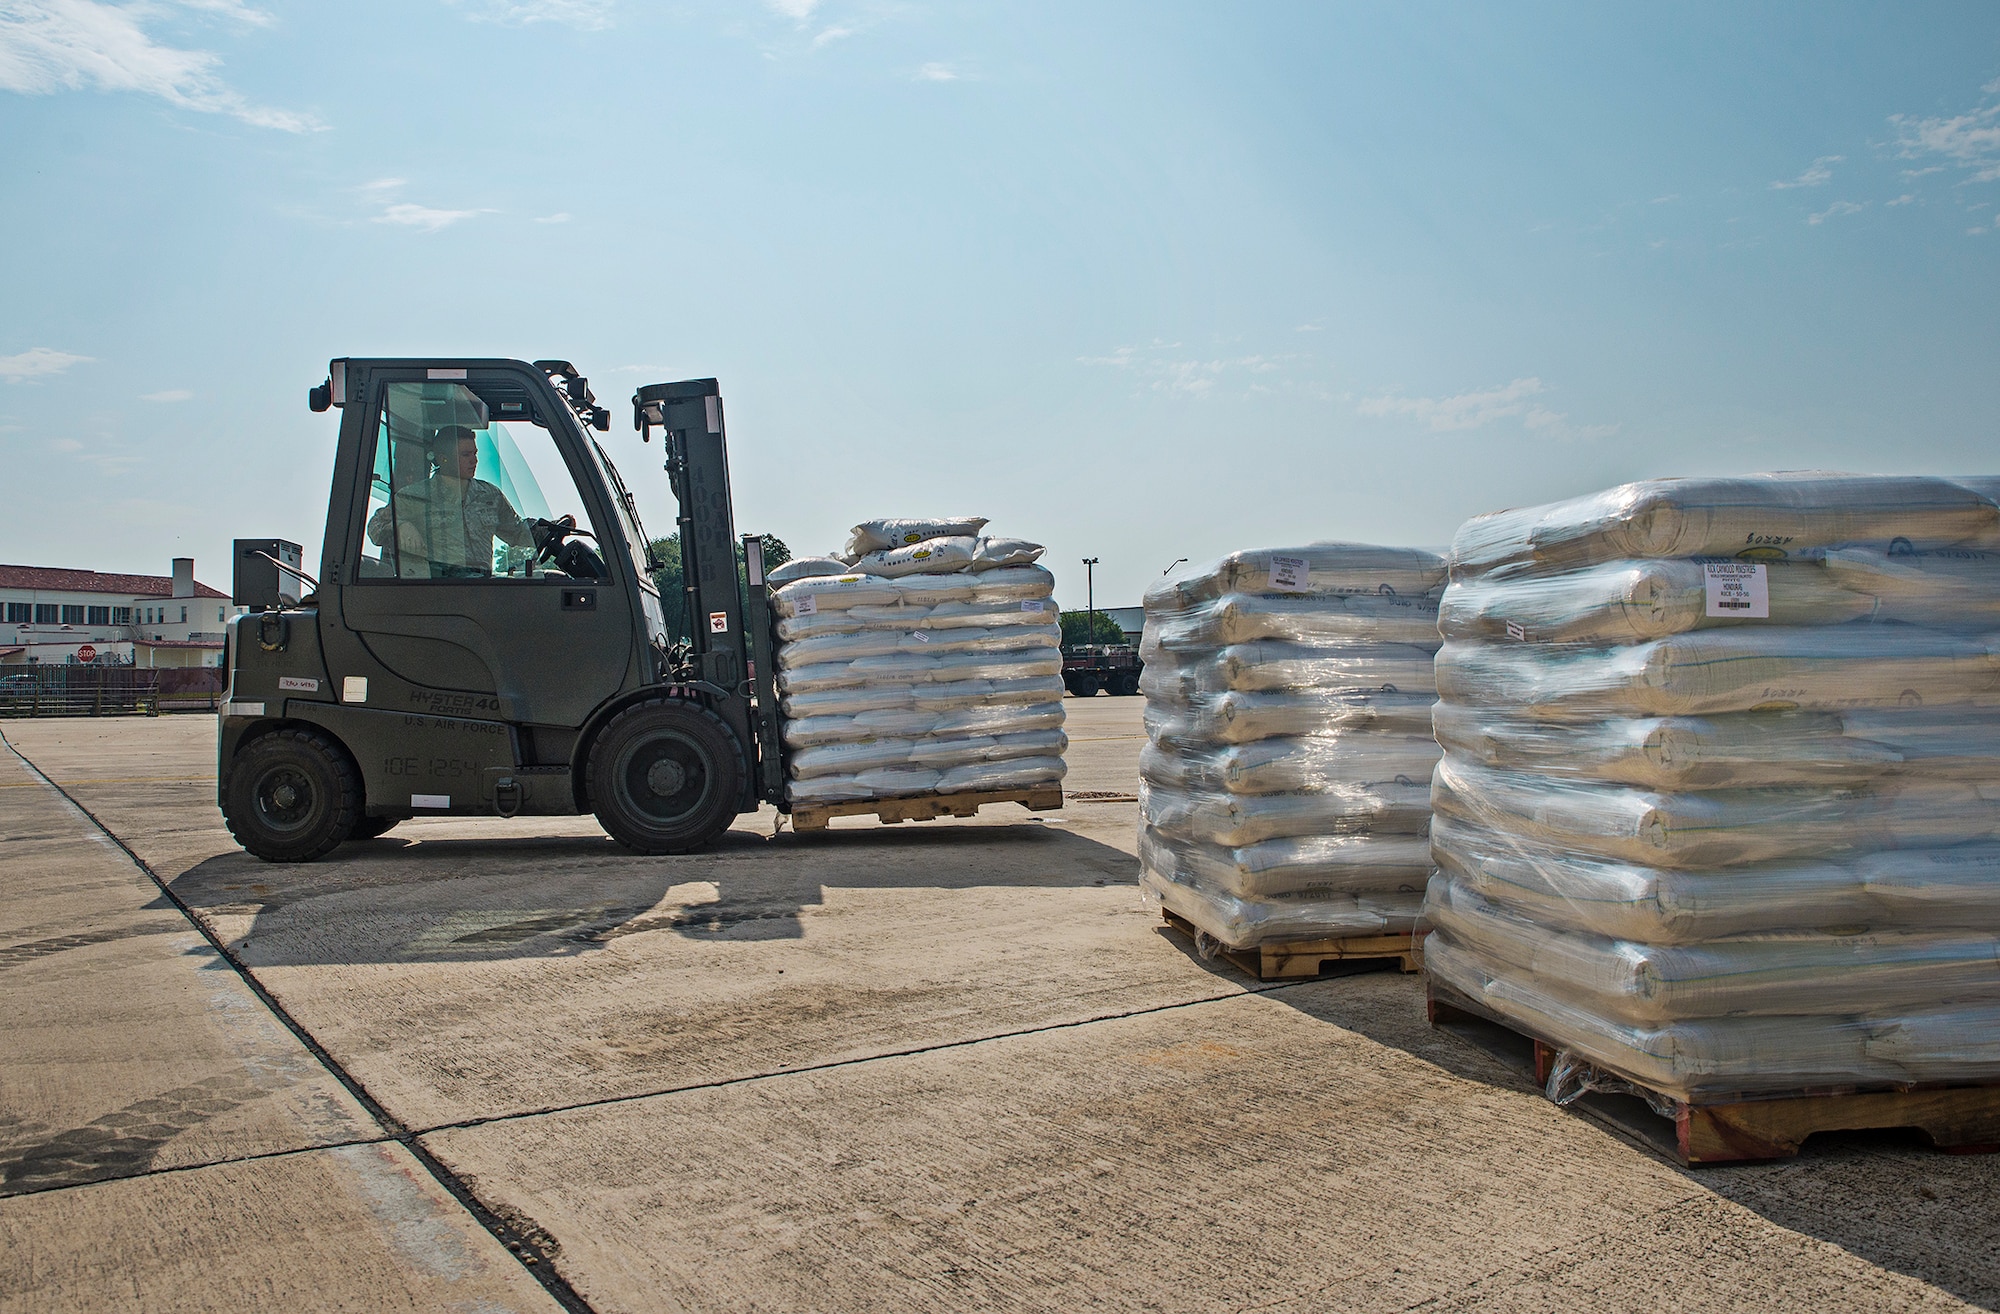 Airmen with the 502nd Logistics Readiness Squadron use a forklift to move pallets of rice and beans May 11, 2016 at Joint Base San Antonio-Lackland, Texas. The 433rd Airlift Wing and 502nd LRS worked together to palletize, load, and transport 90,000 pounds of food aid to Yoro, Honduras.  (U.S. Air Force photo by Benjamin Faske) 